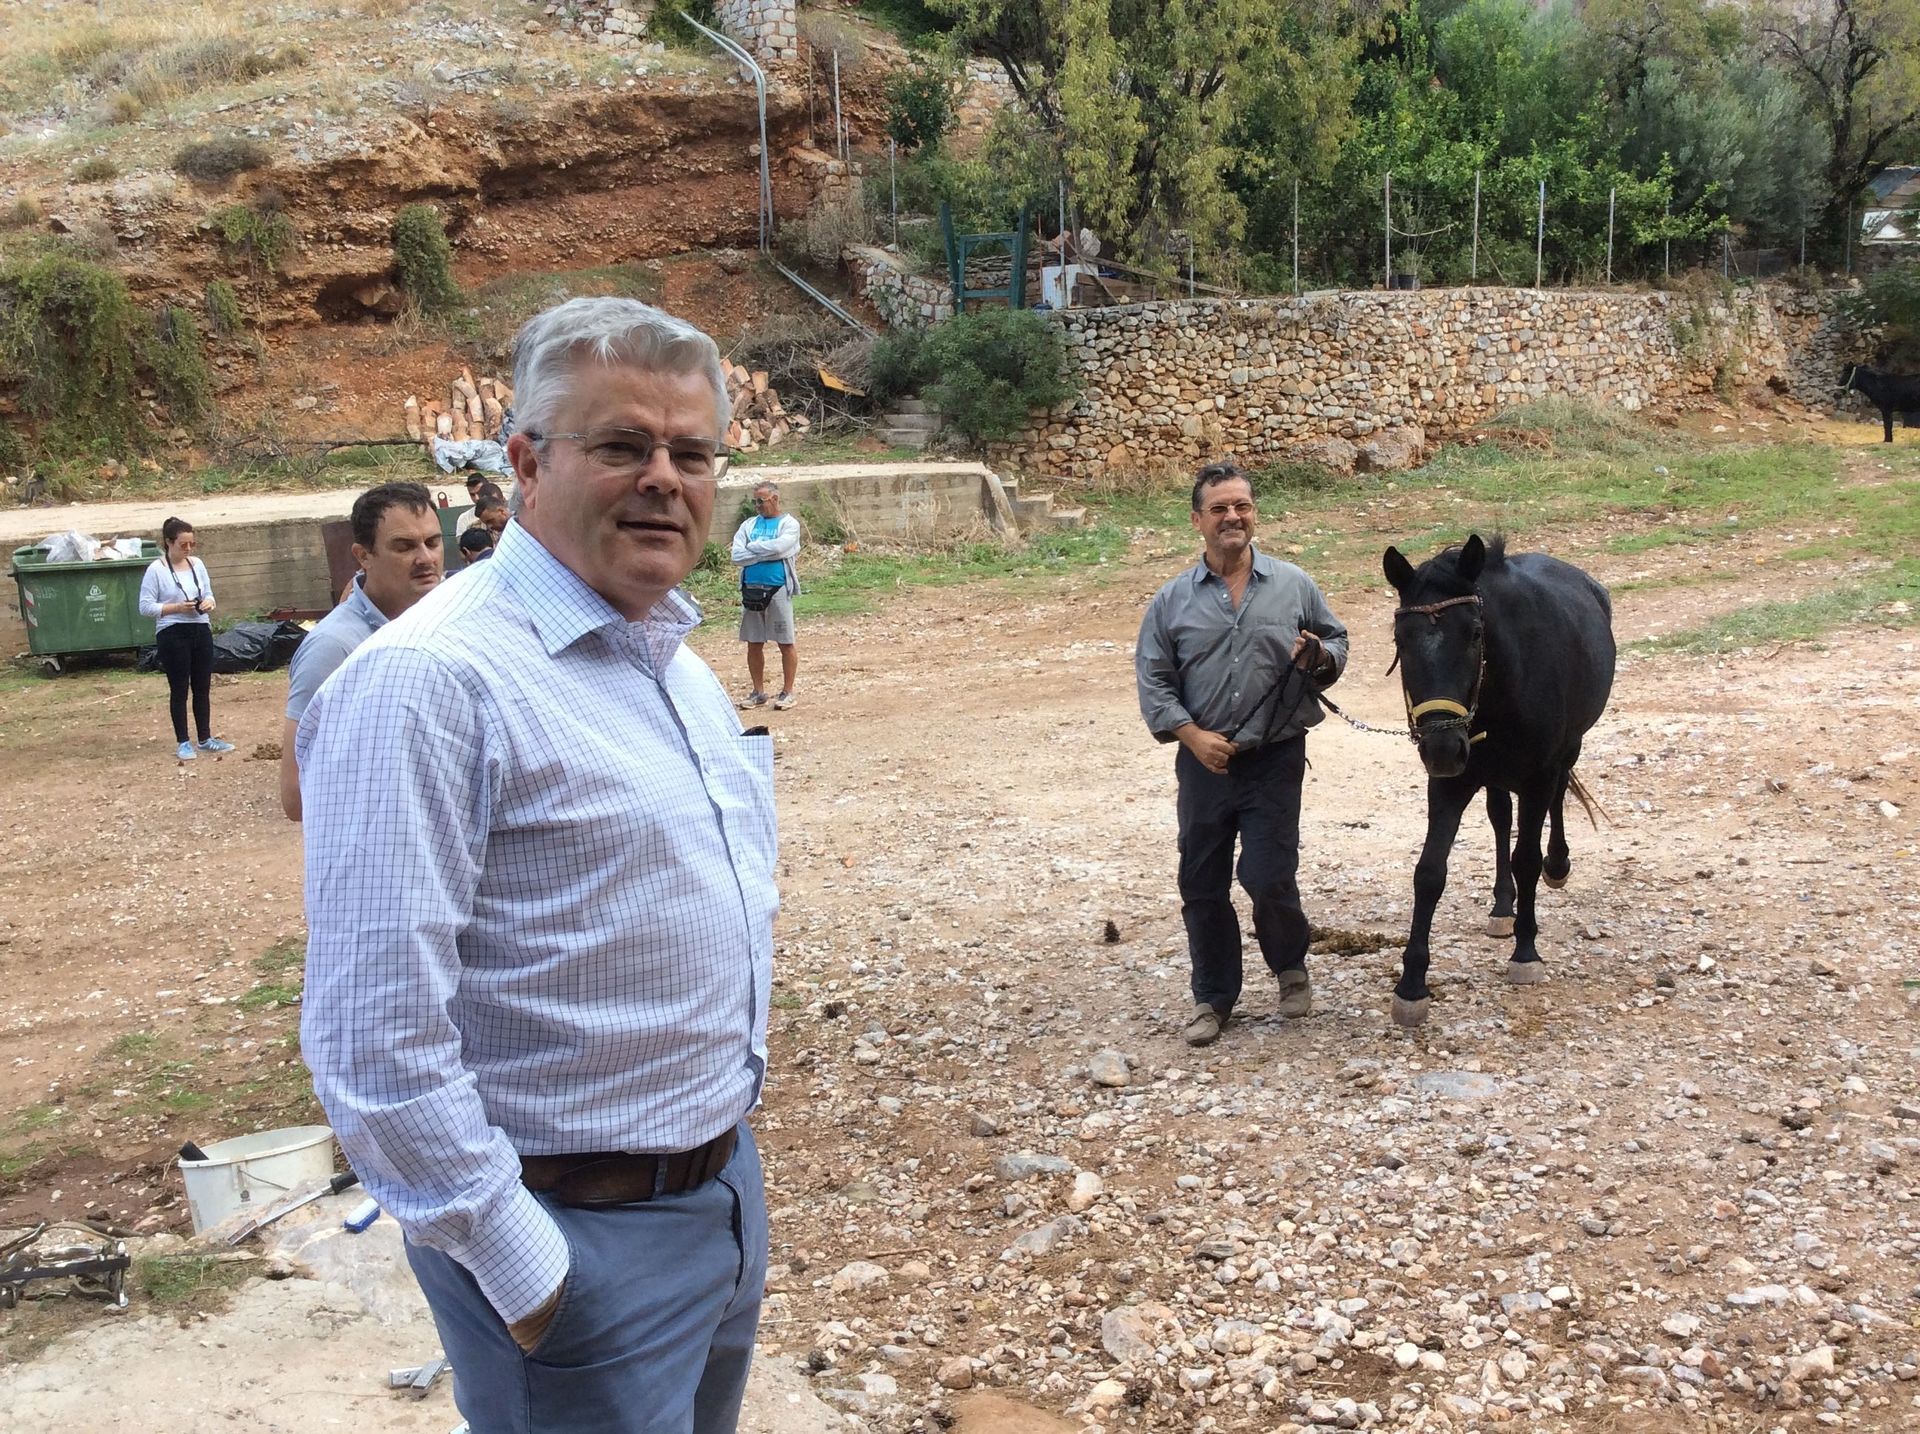 GAWF Equine Vets visit Hydra Island Greece for their annual check up of the island horses, mules and donkeys.